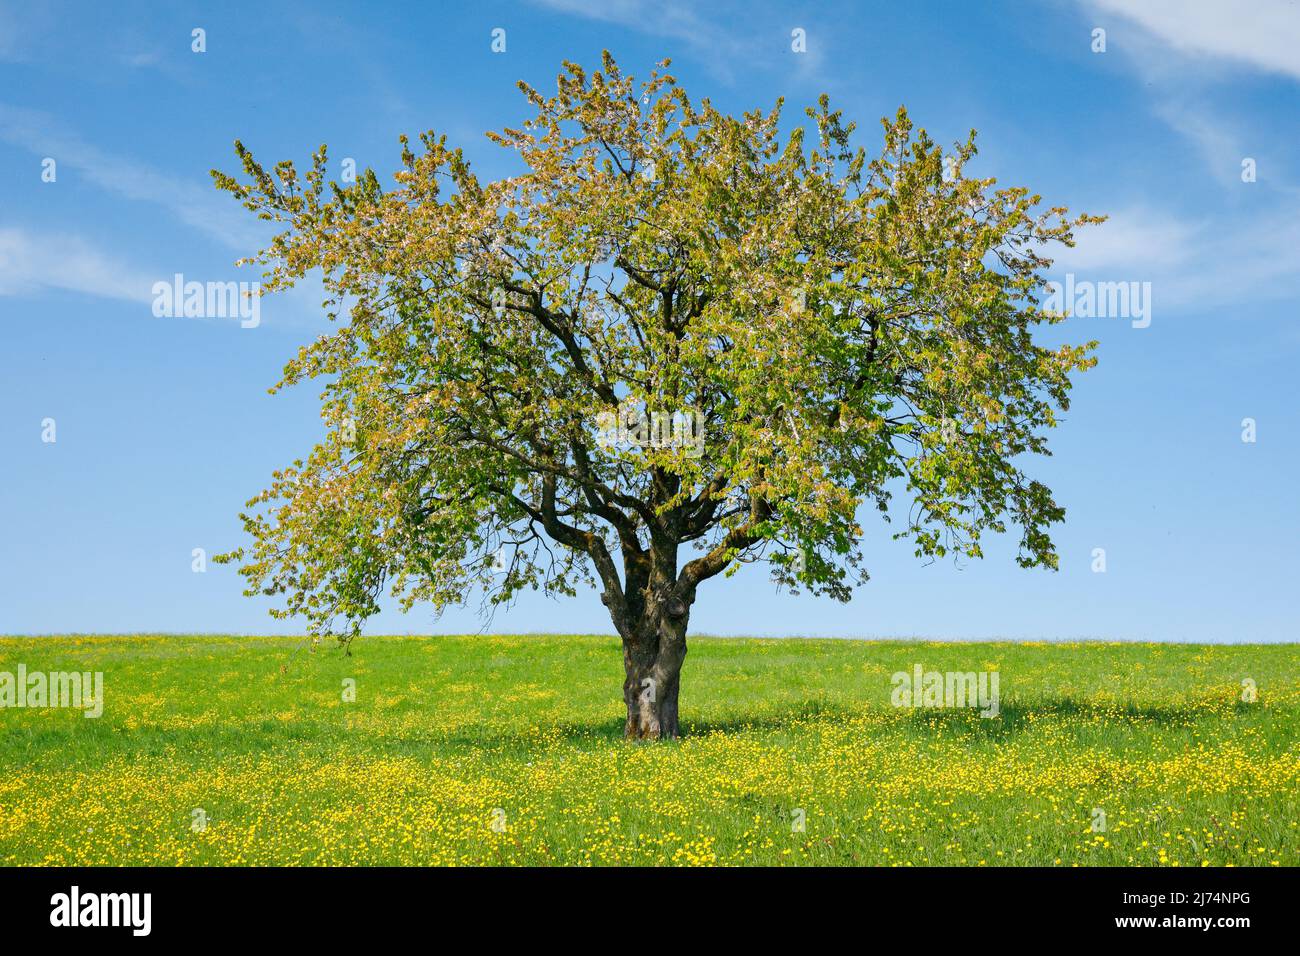 apple tree (Malus domestica), Free standing apple tree in a meadow with lots of yellow blooming buttercups near Uster, Switzerland, Zuercher Stock Photo